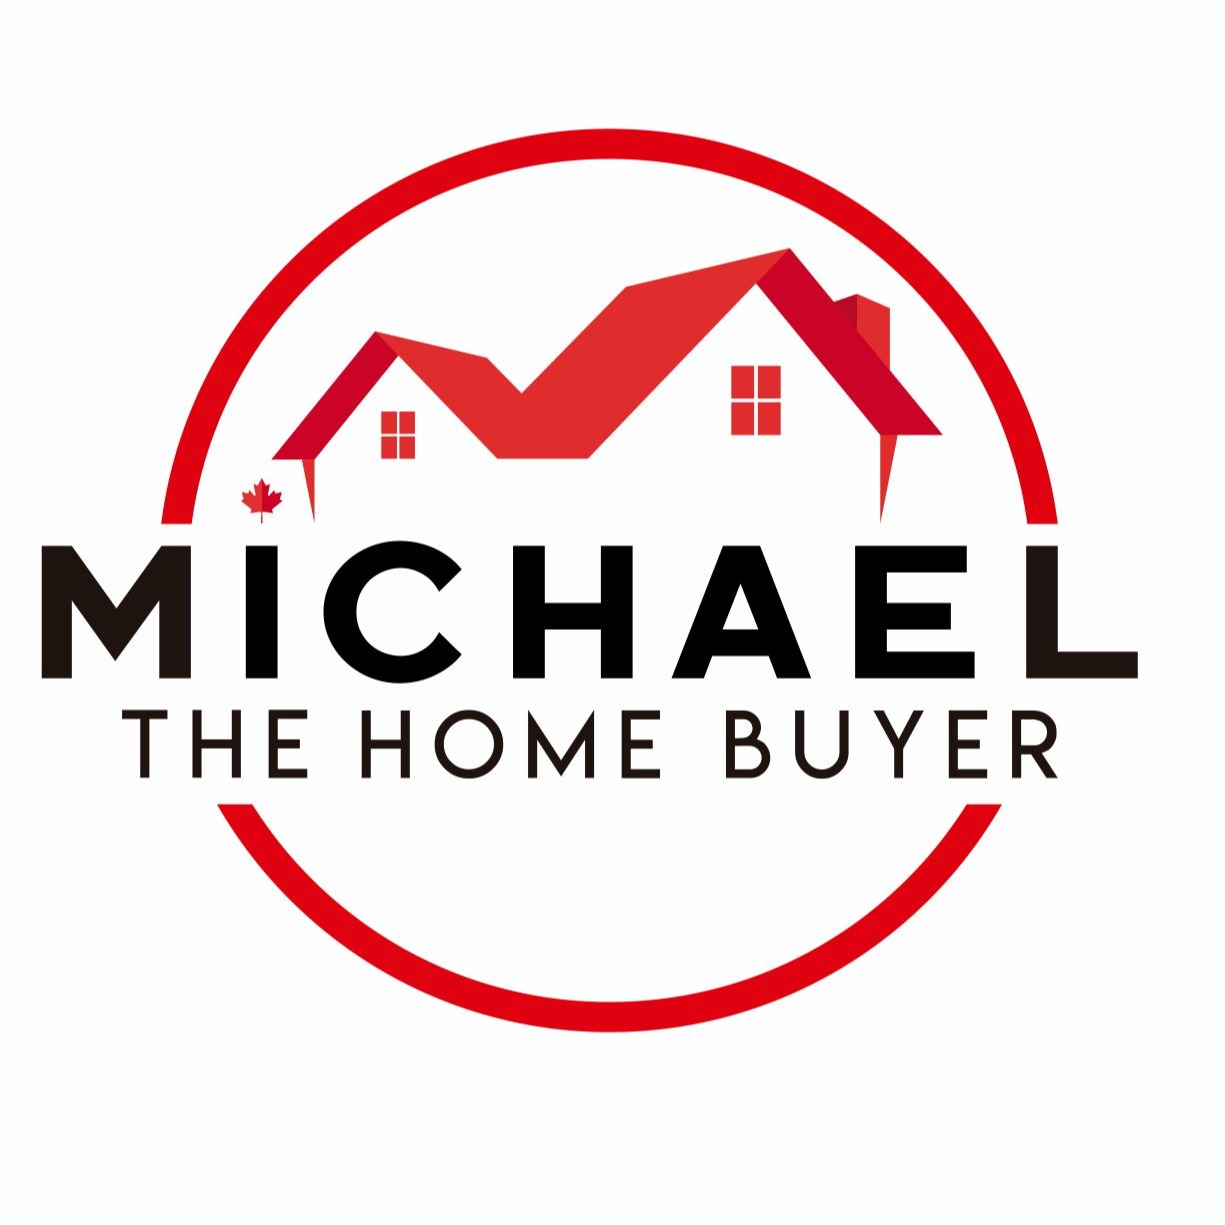 Michael the Home Buyer